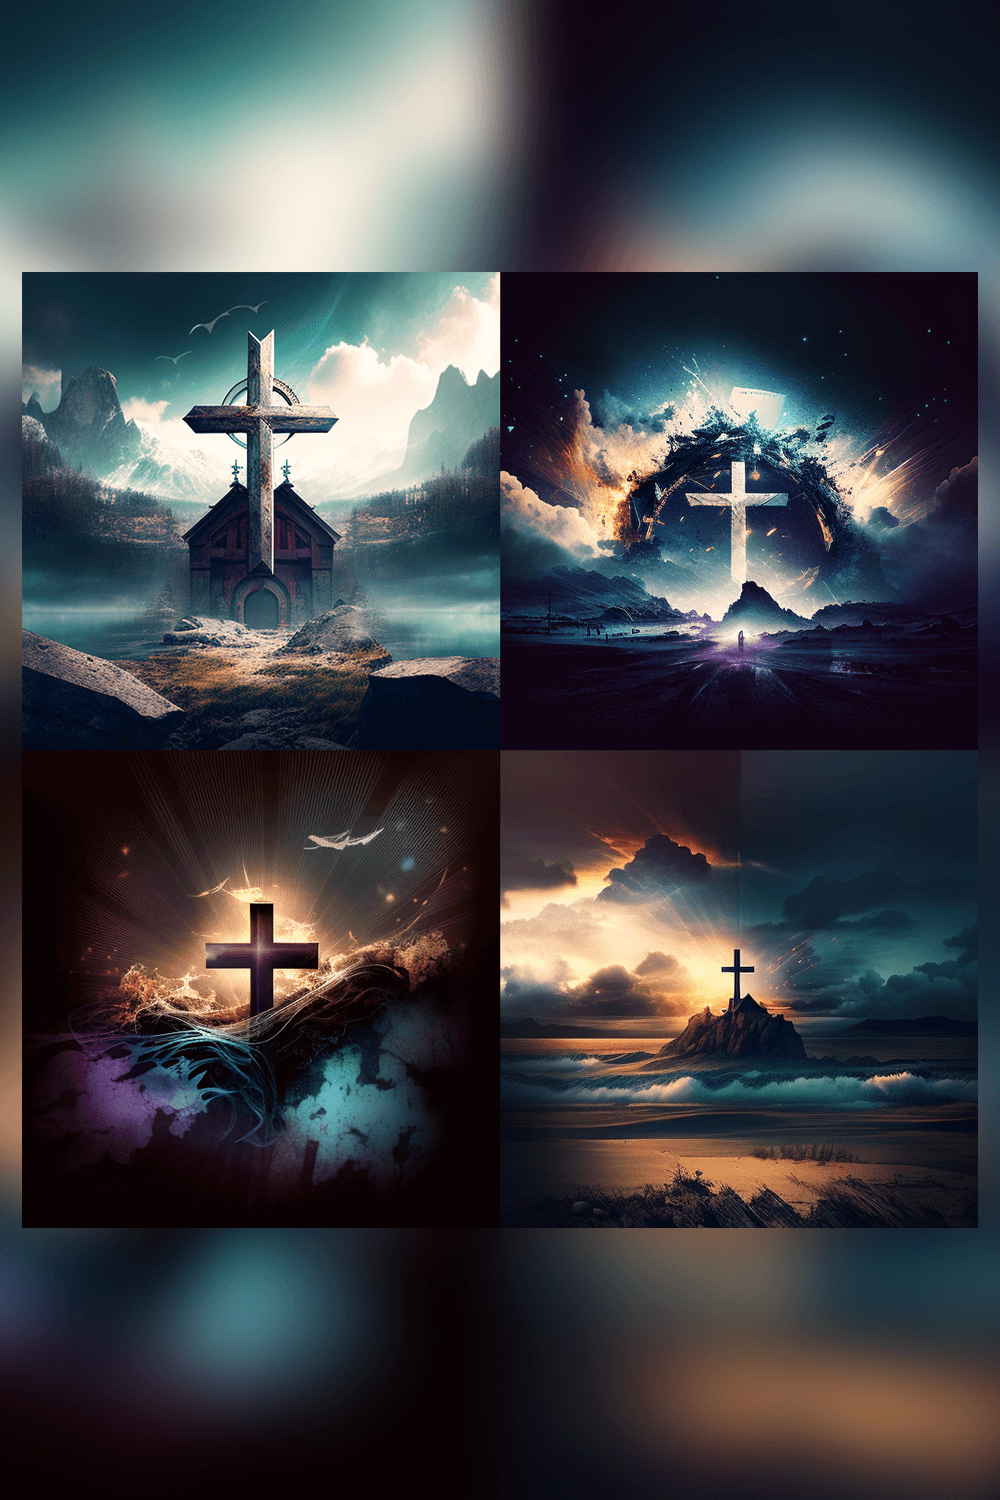 Series of photoshopped images of a cross in the sky.